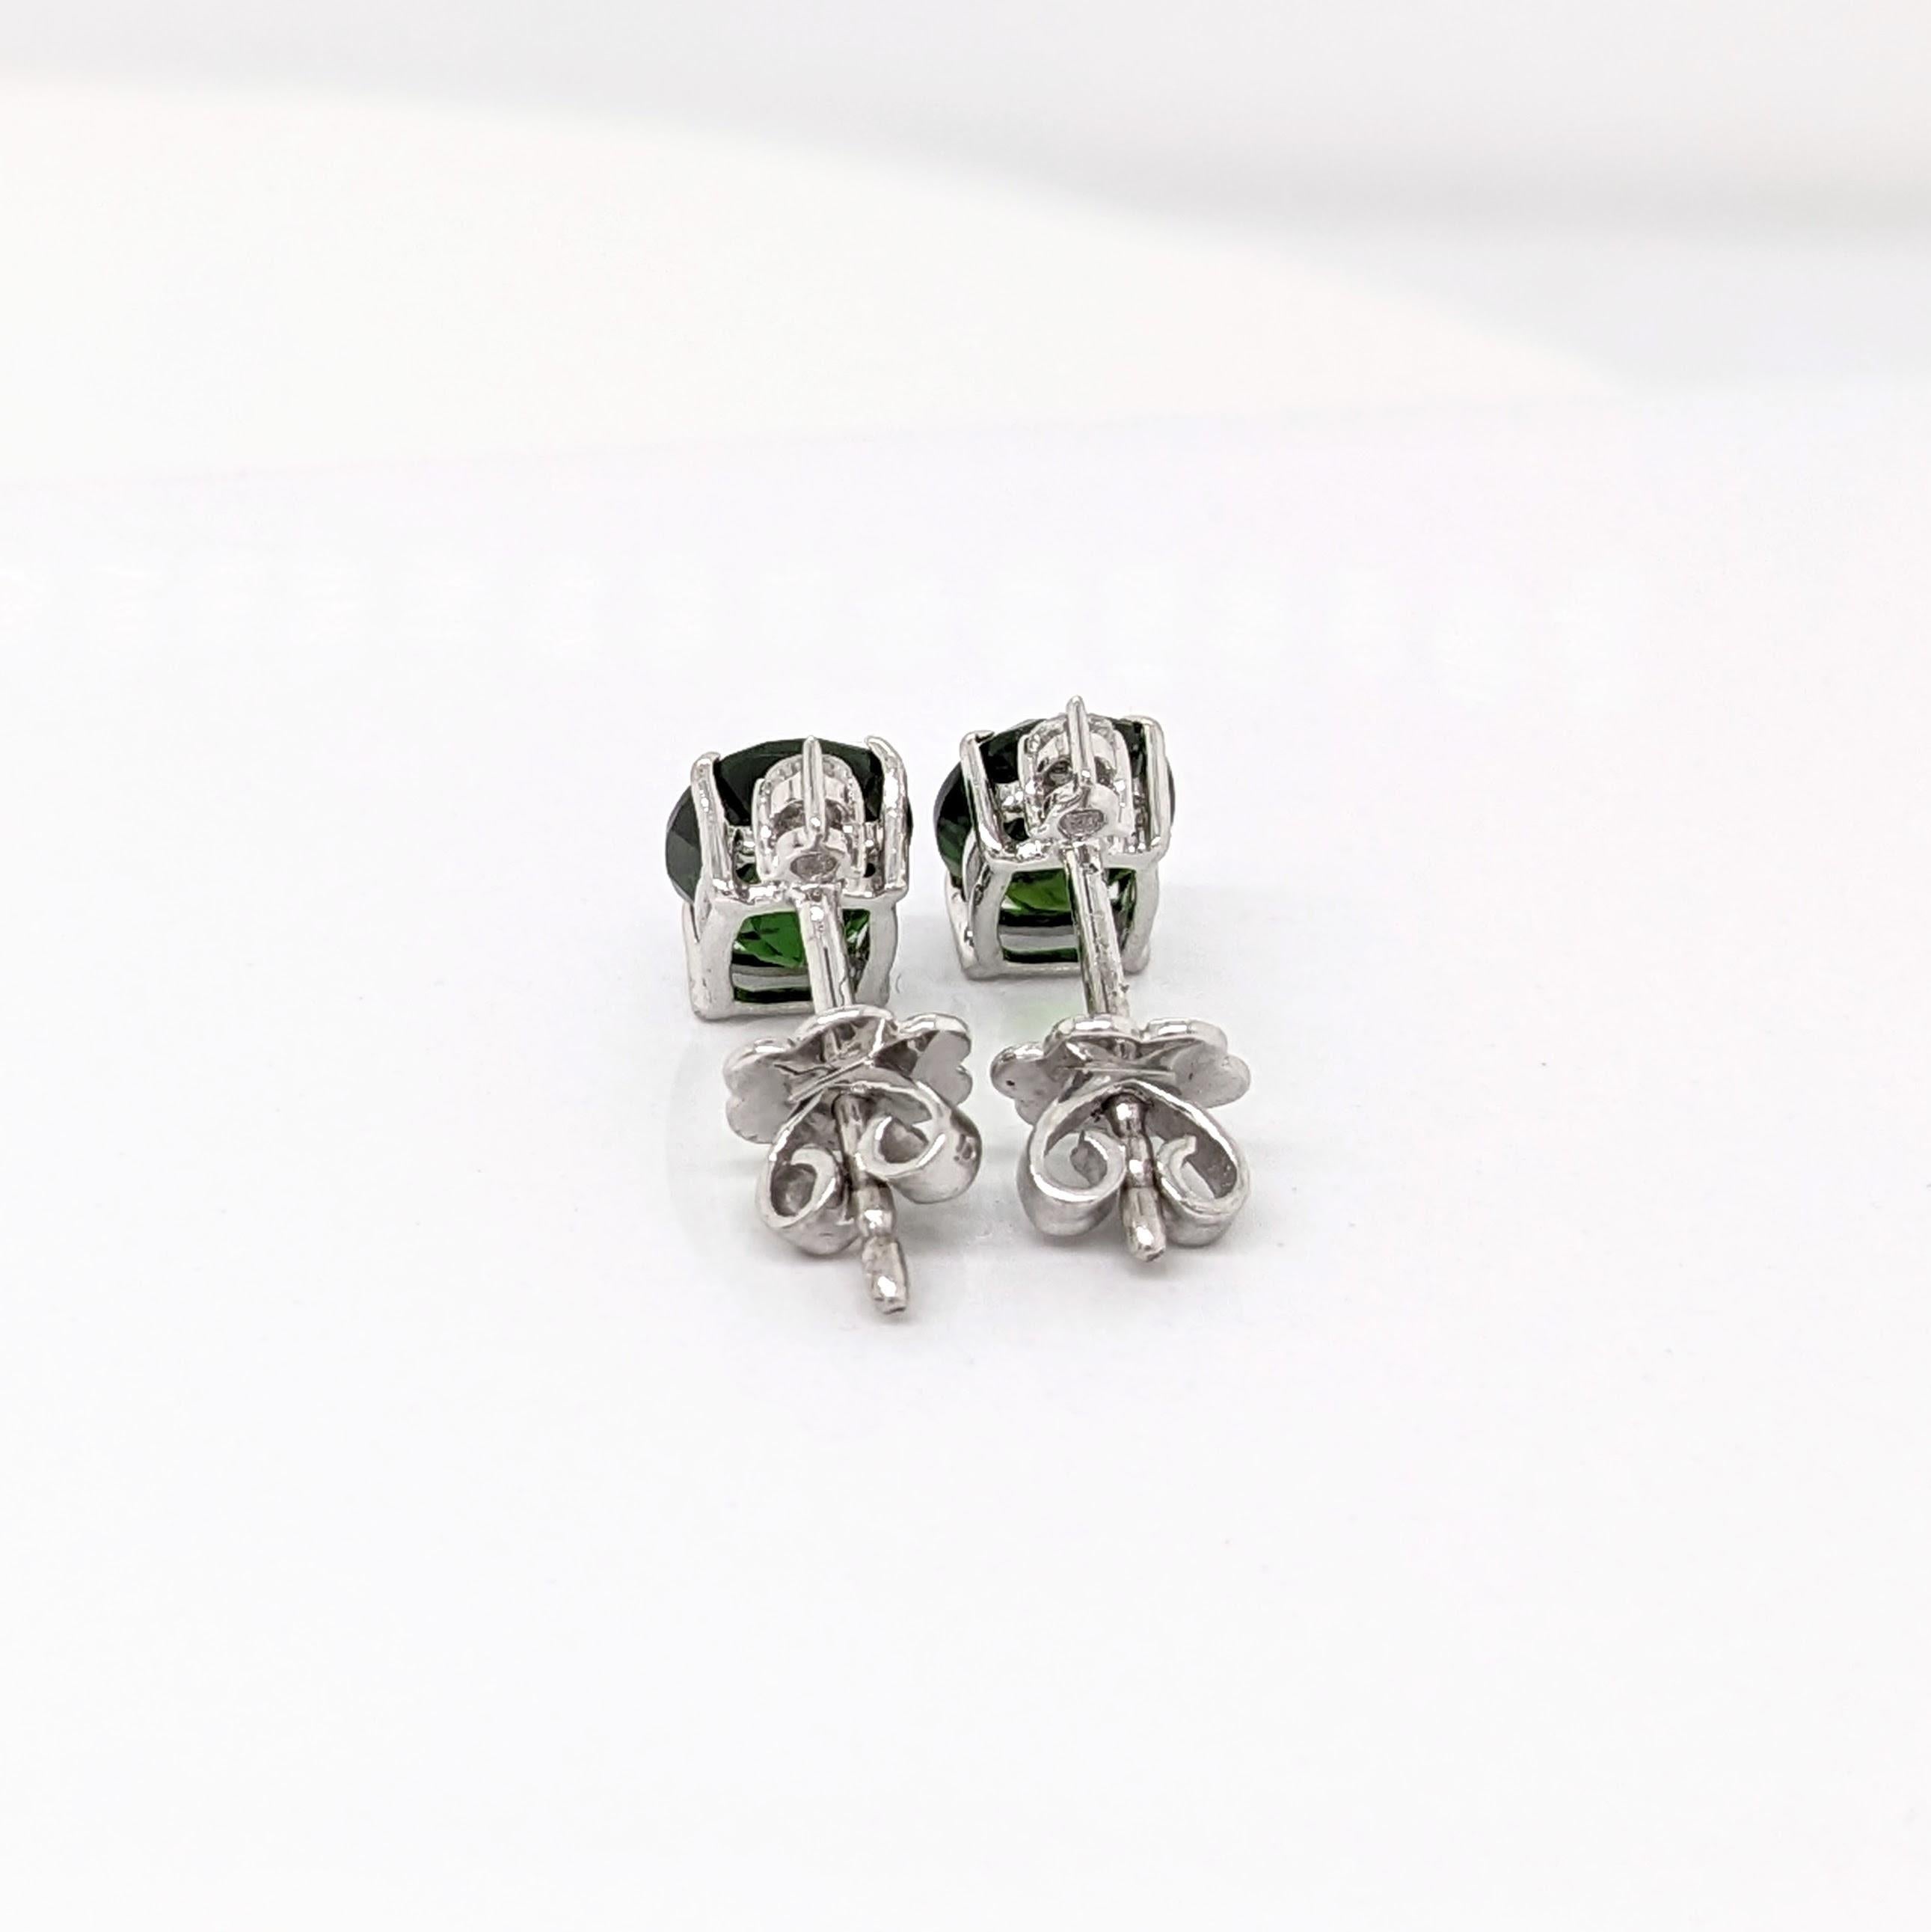 2.6ct Chrome Diopside Earrings w Natural Diamonds in Solid 14K Gold Oval 7x5mm 1